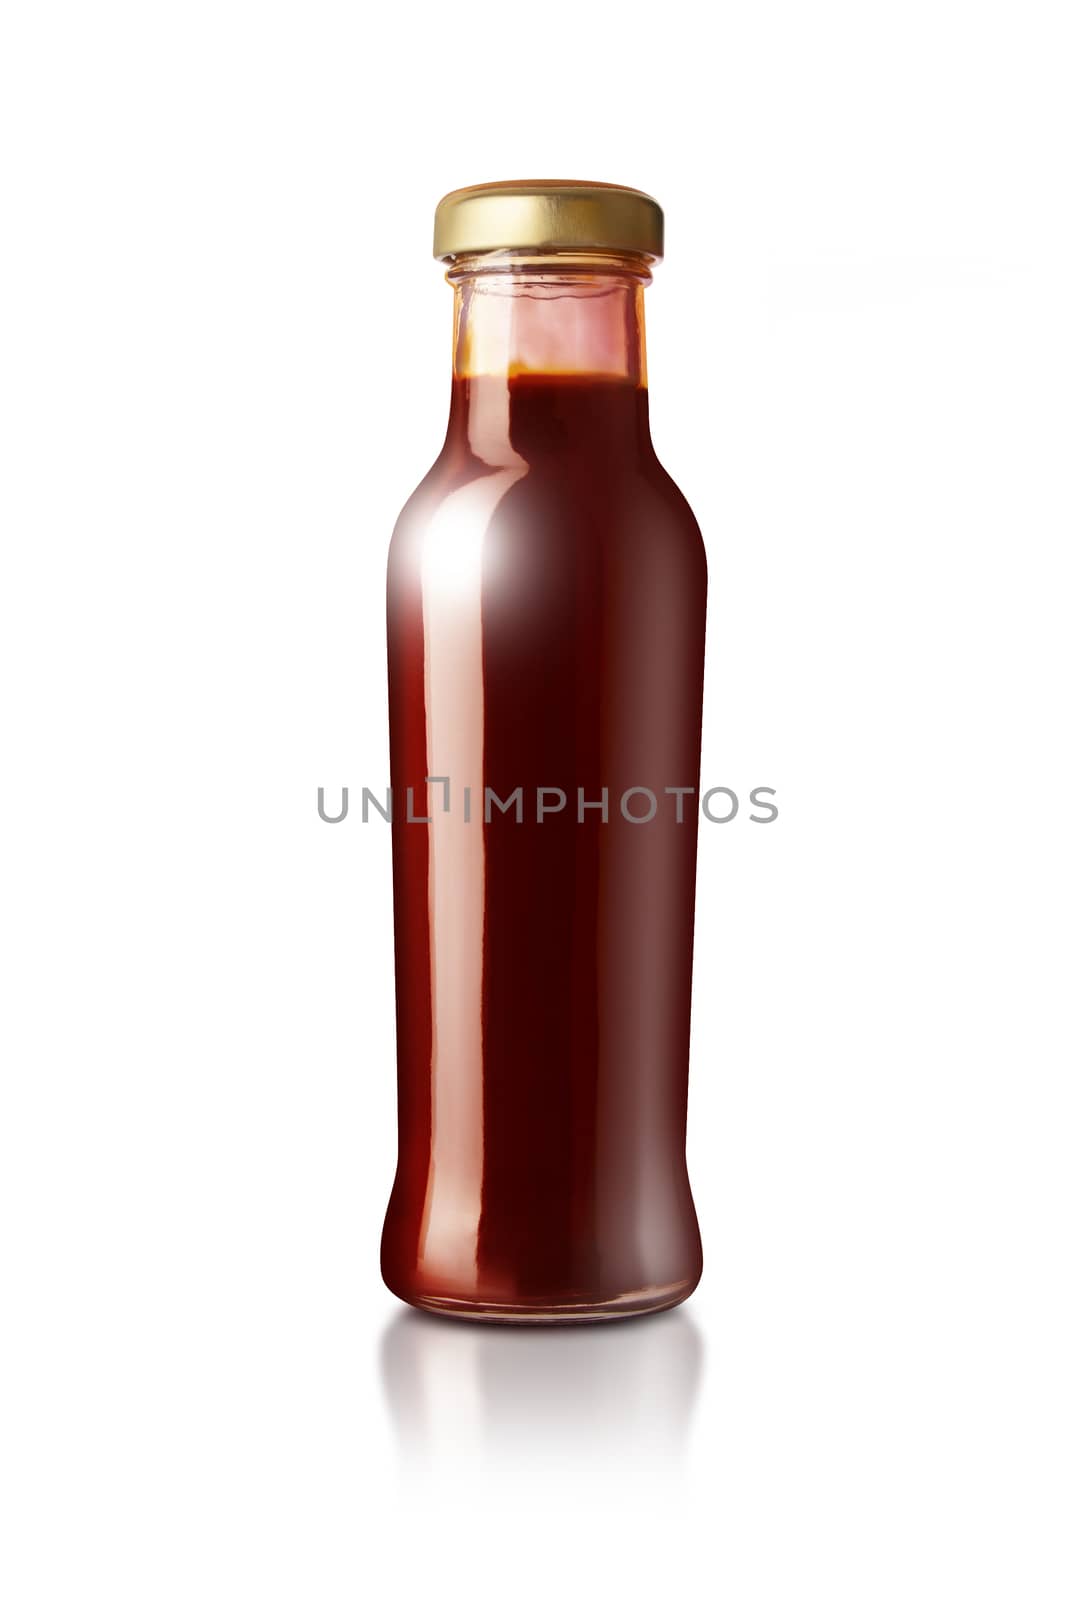 Glass bottle of ketchup isolated on white background by SlayCer